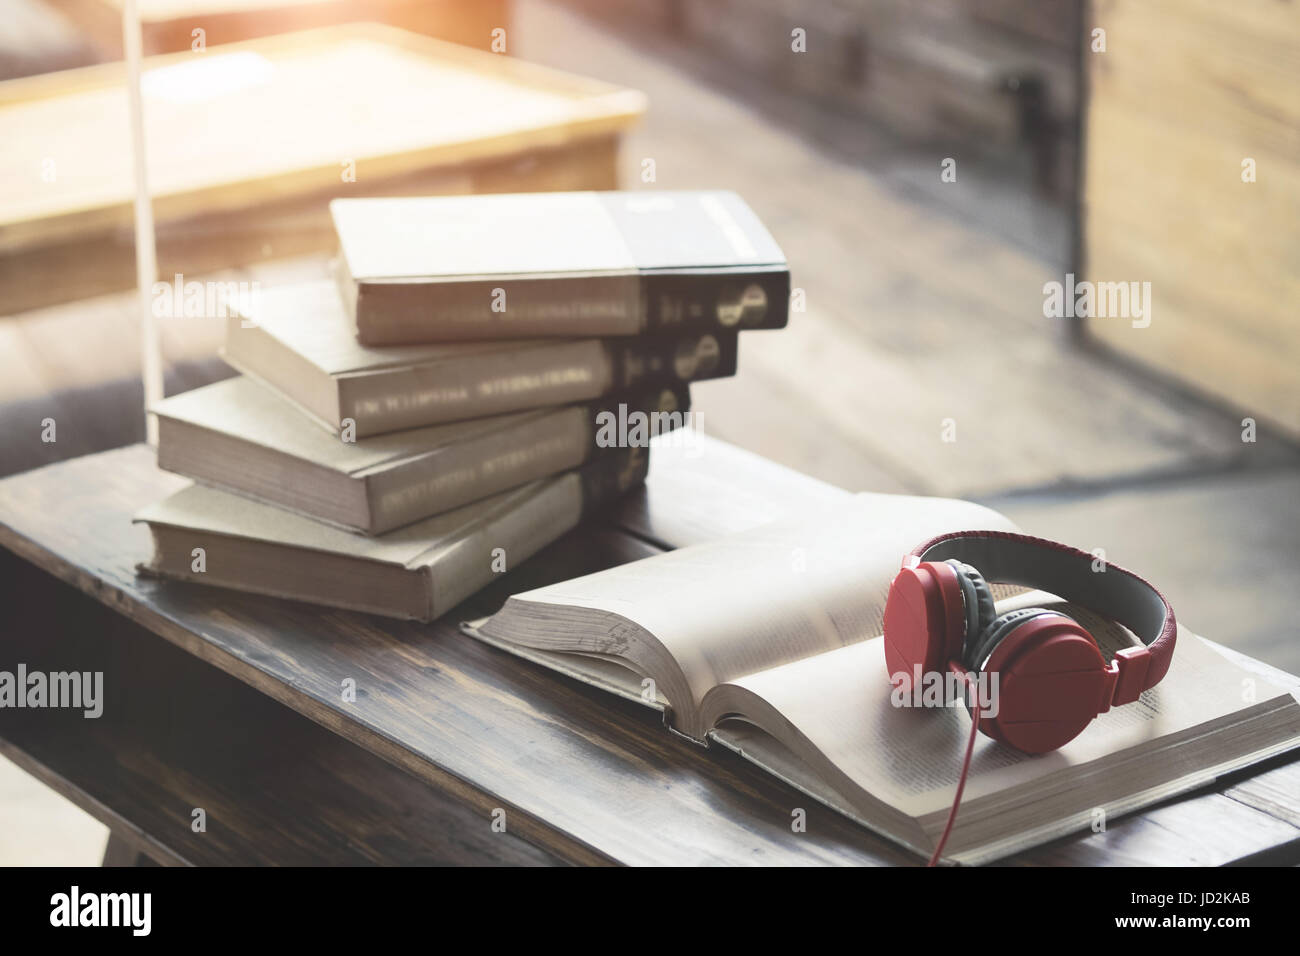 Red headphone on book in cafe or library,morning light. Stock Photo